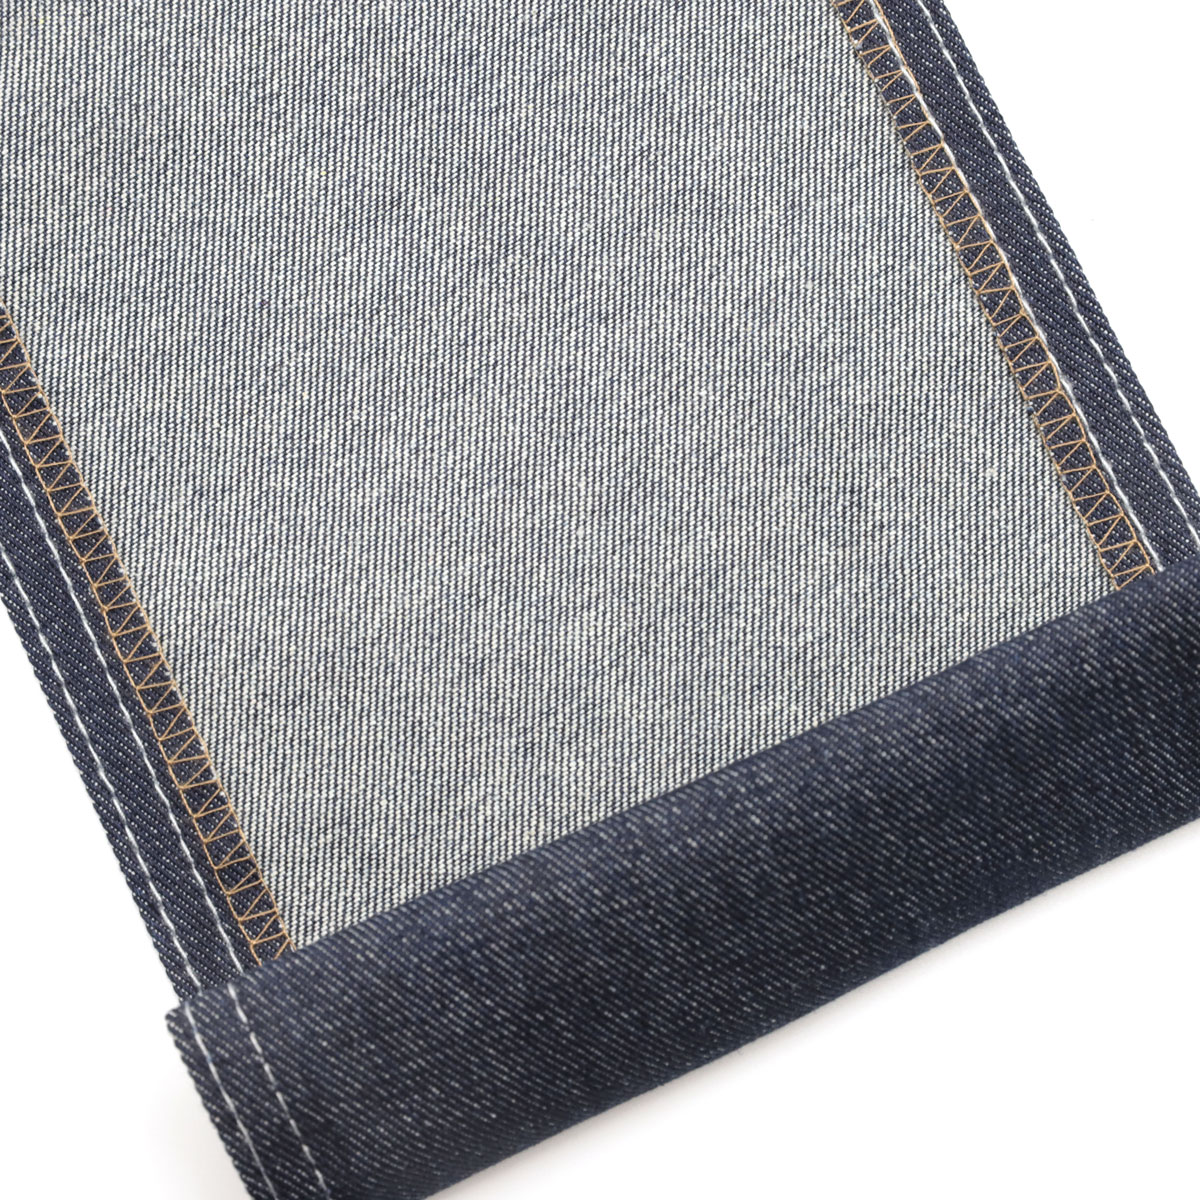 Whats the Best Denim Fabric Material Brand in China? 1